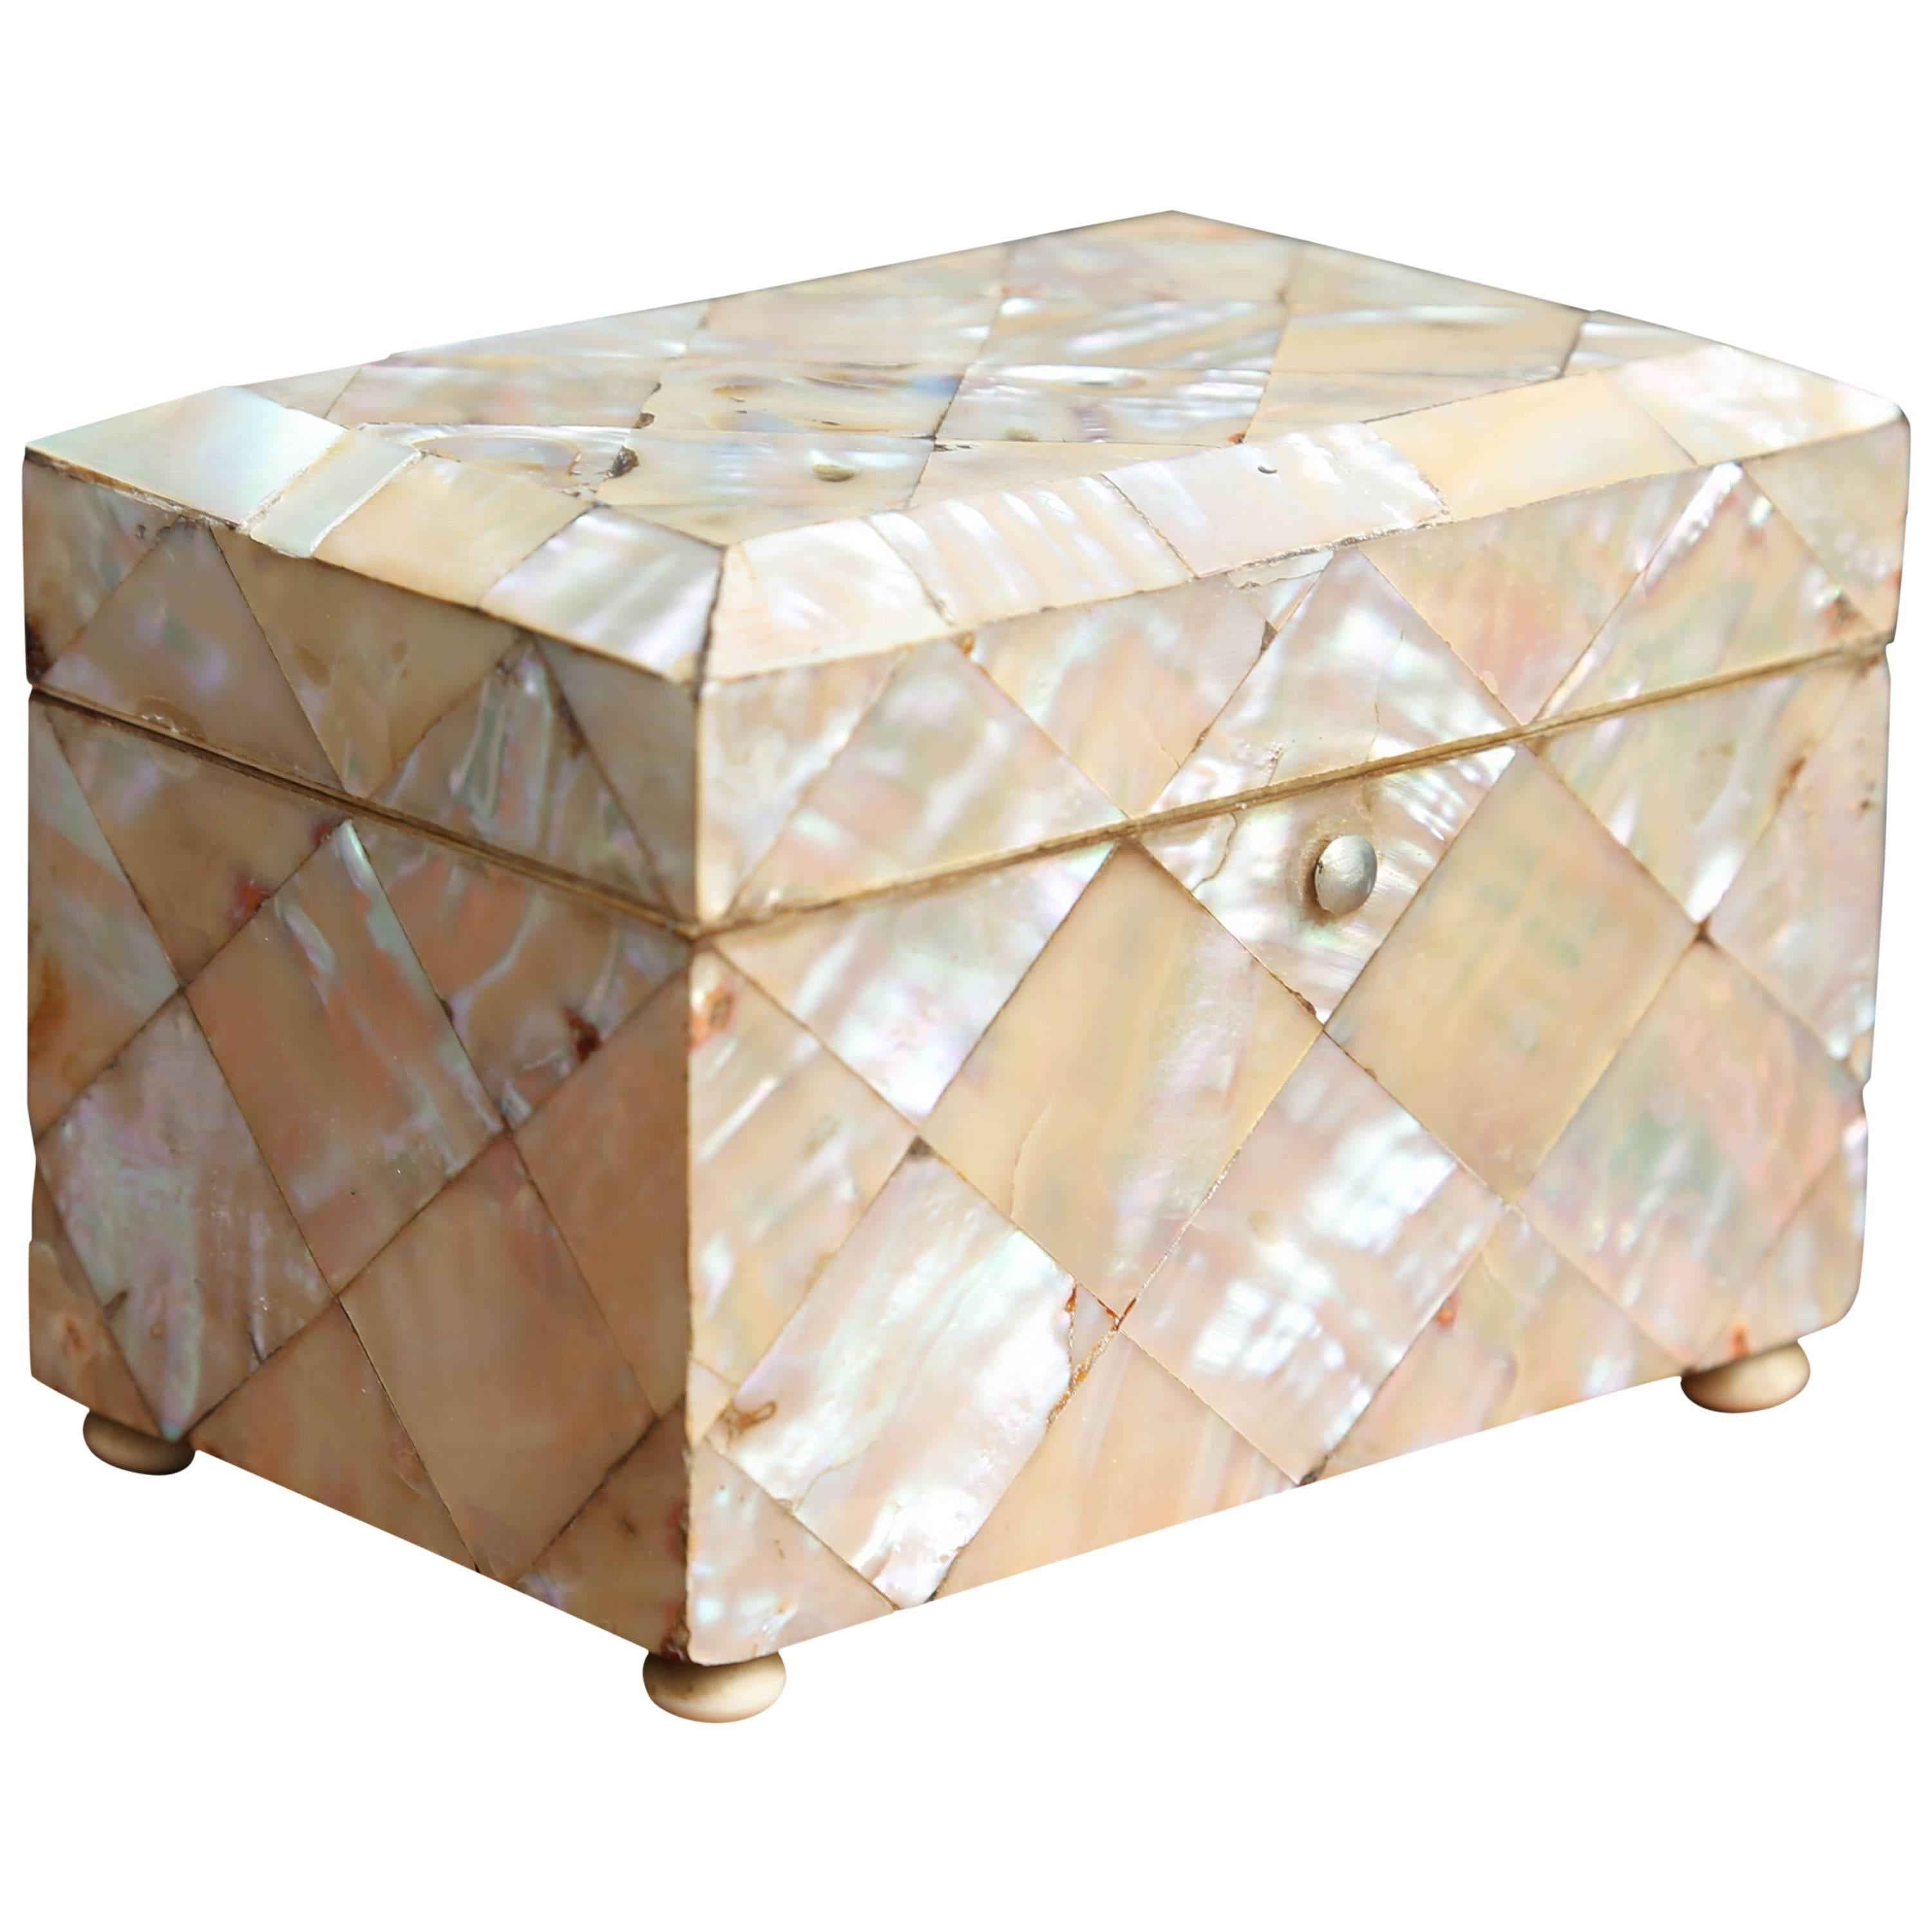 Petite Mother-of-Pearl Tea Caddy